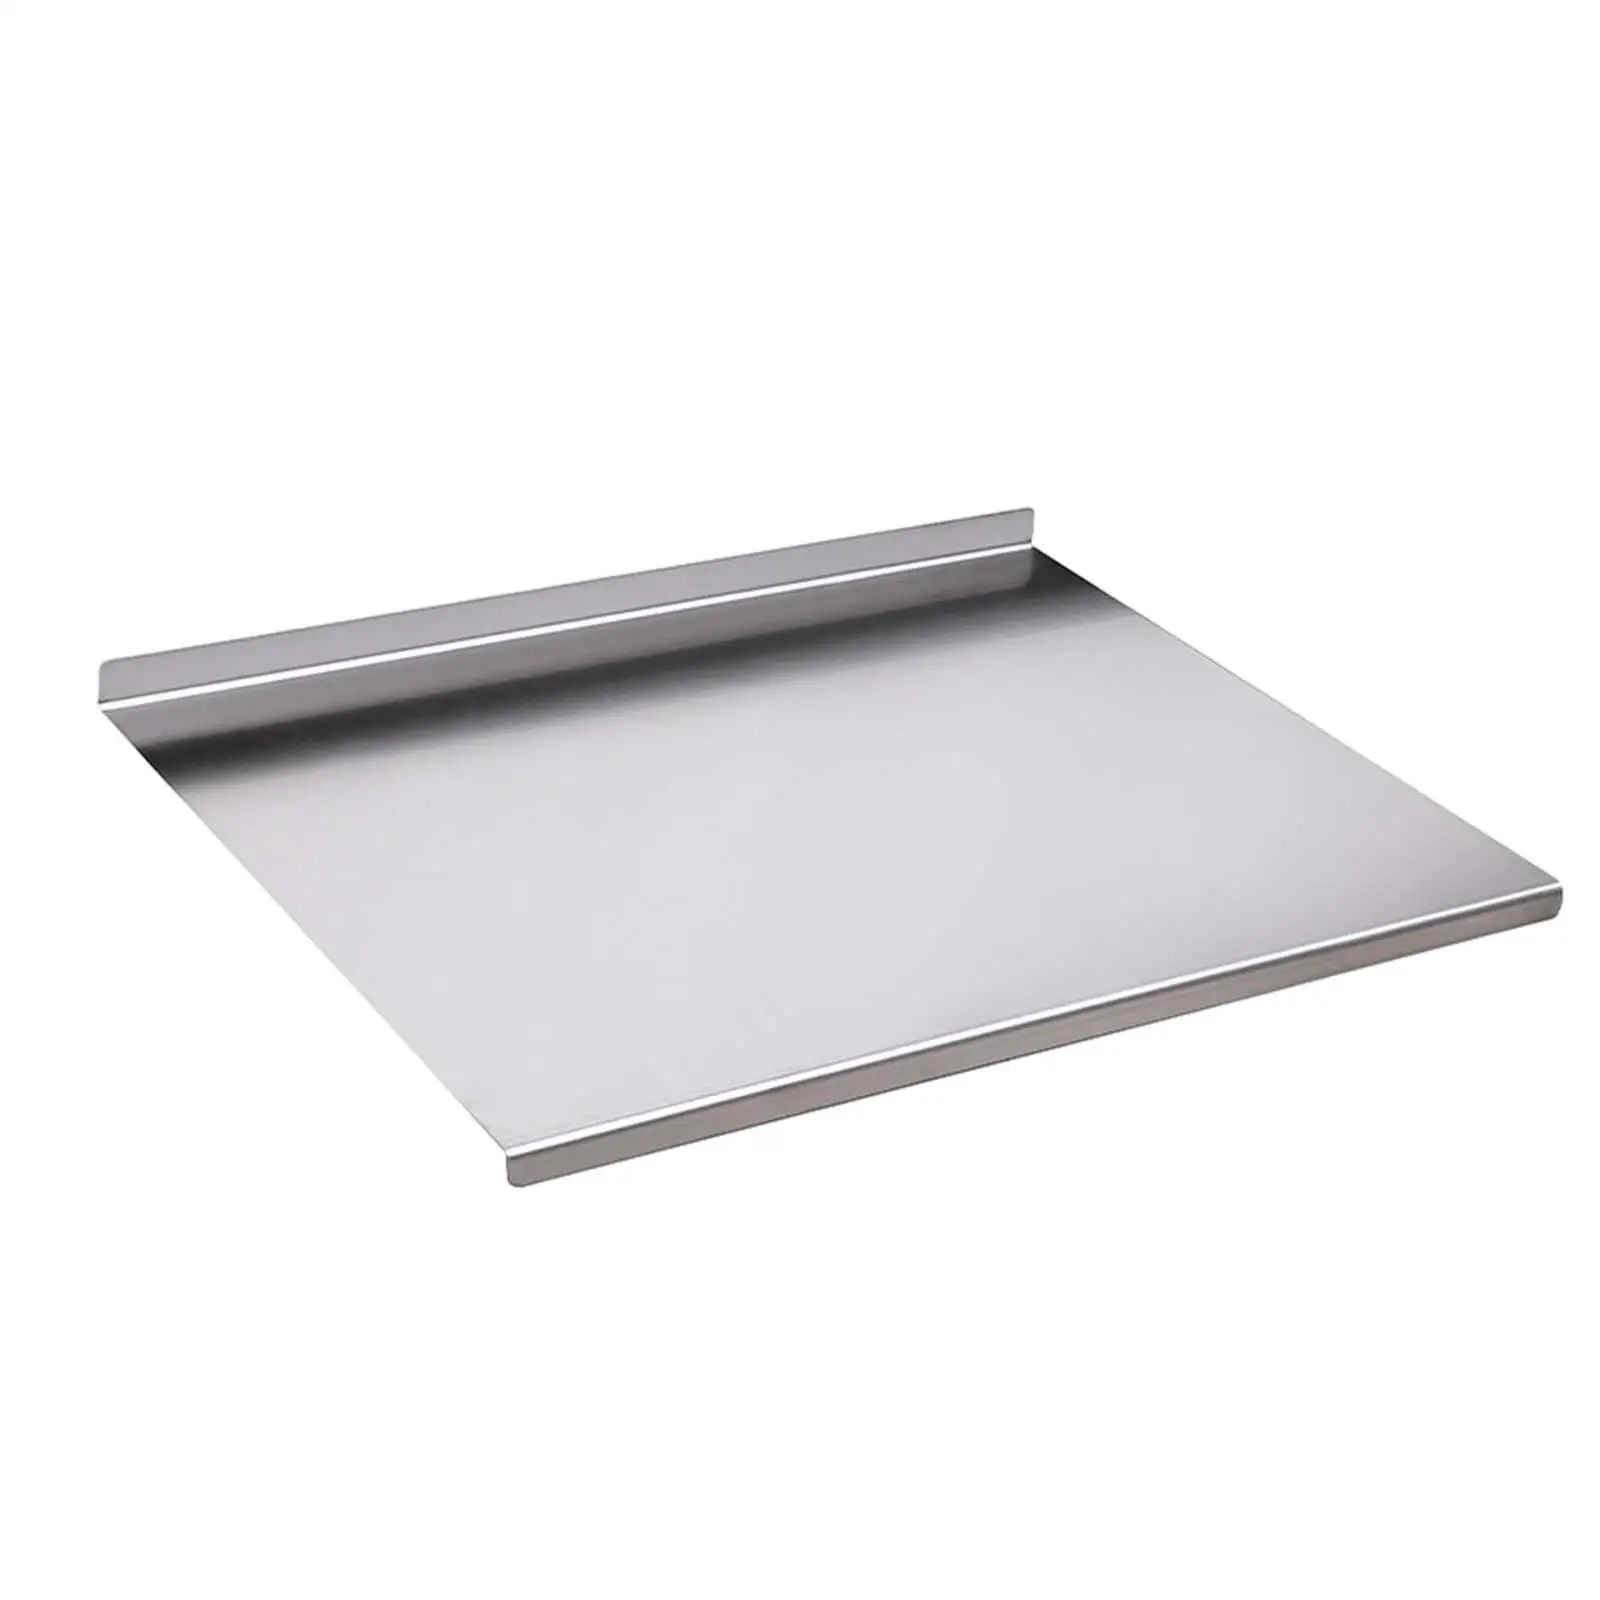 Stainless Steel Chopping Board Pastry Board Large Pizza Biscuits Board Thick